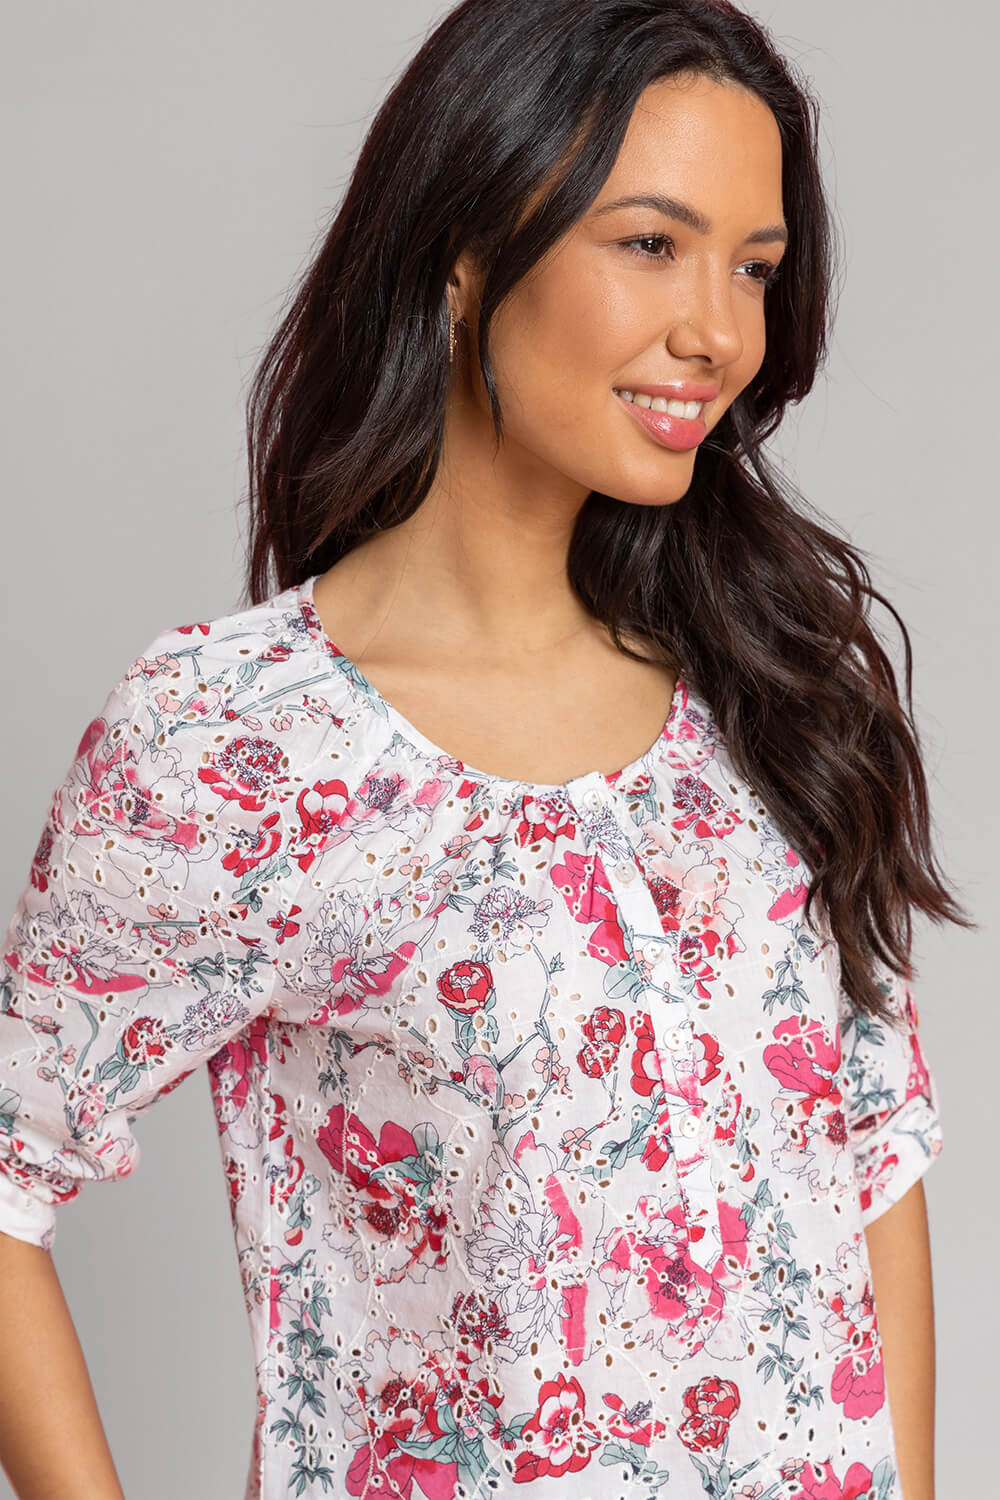 PINK Broderie Floral Print Button Top, Image 4 of 4